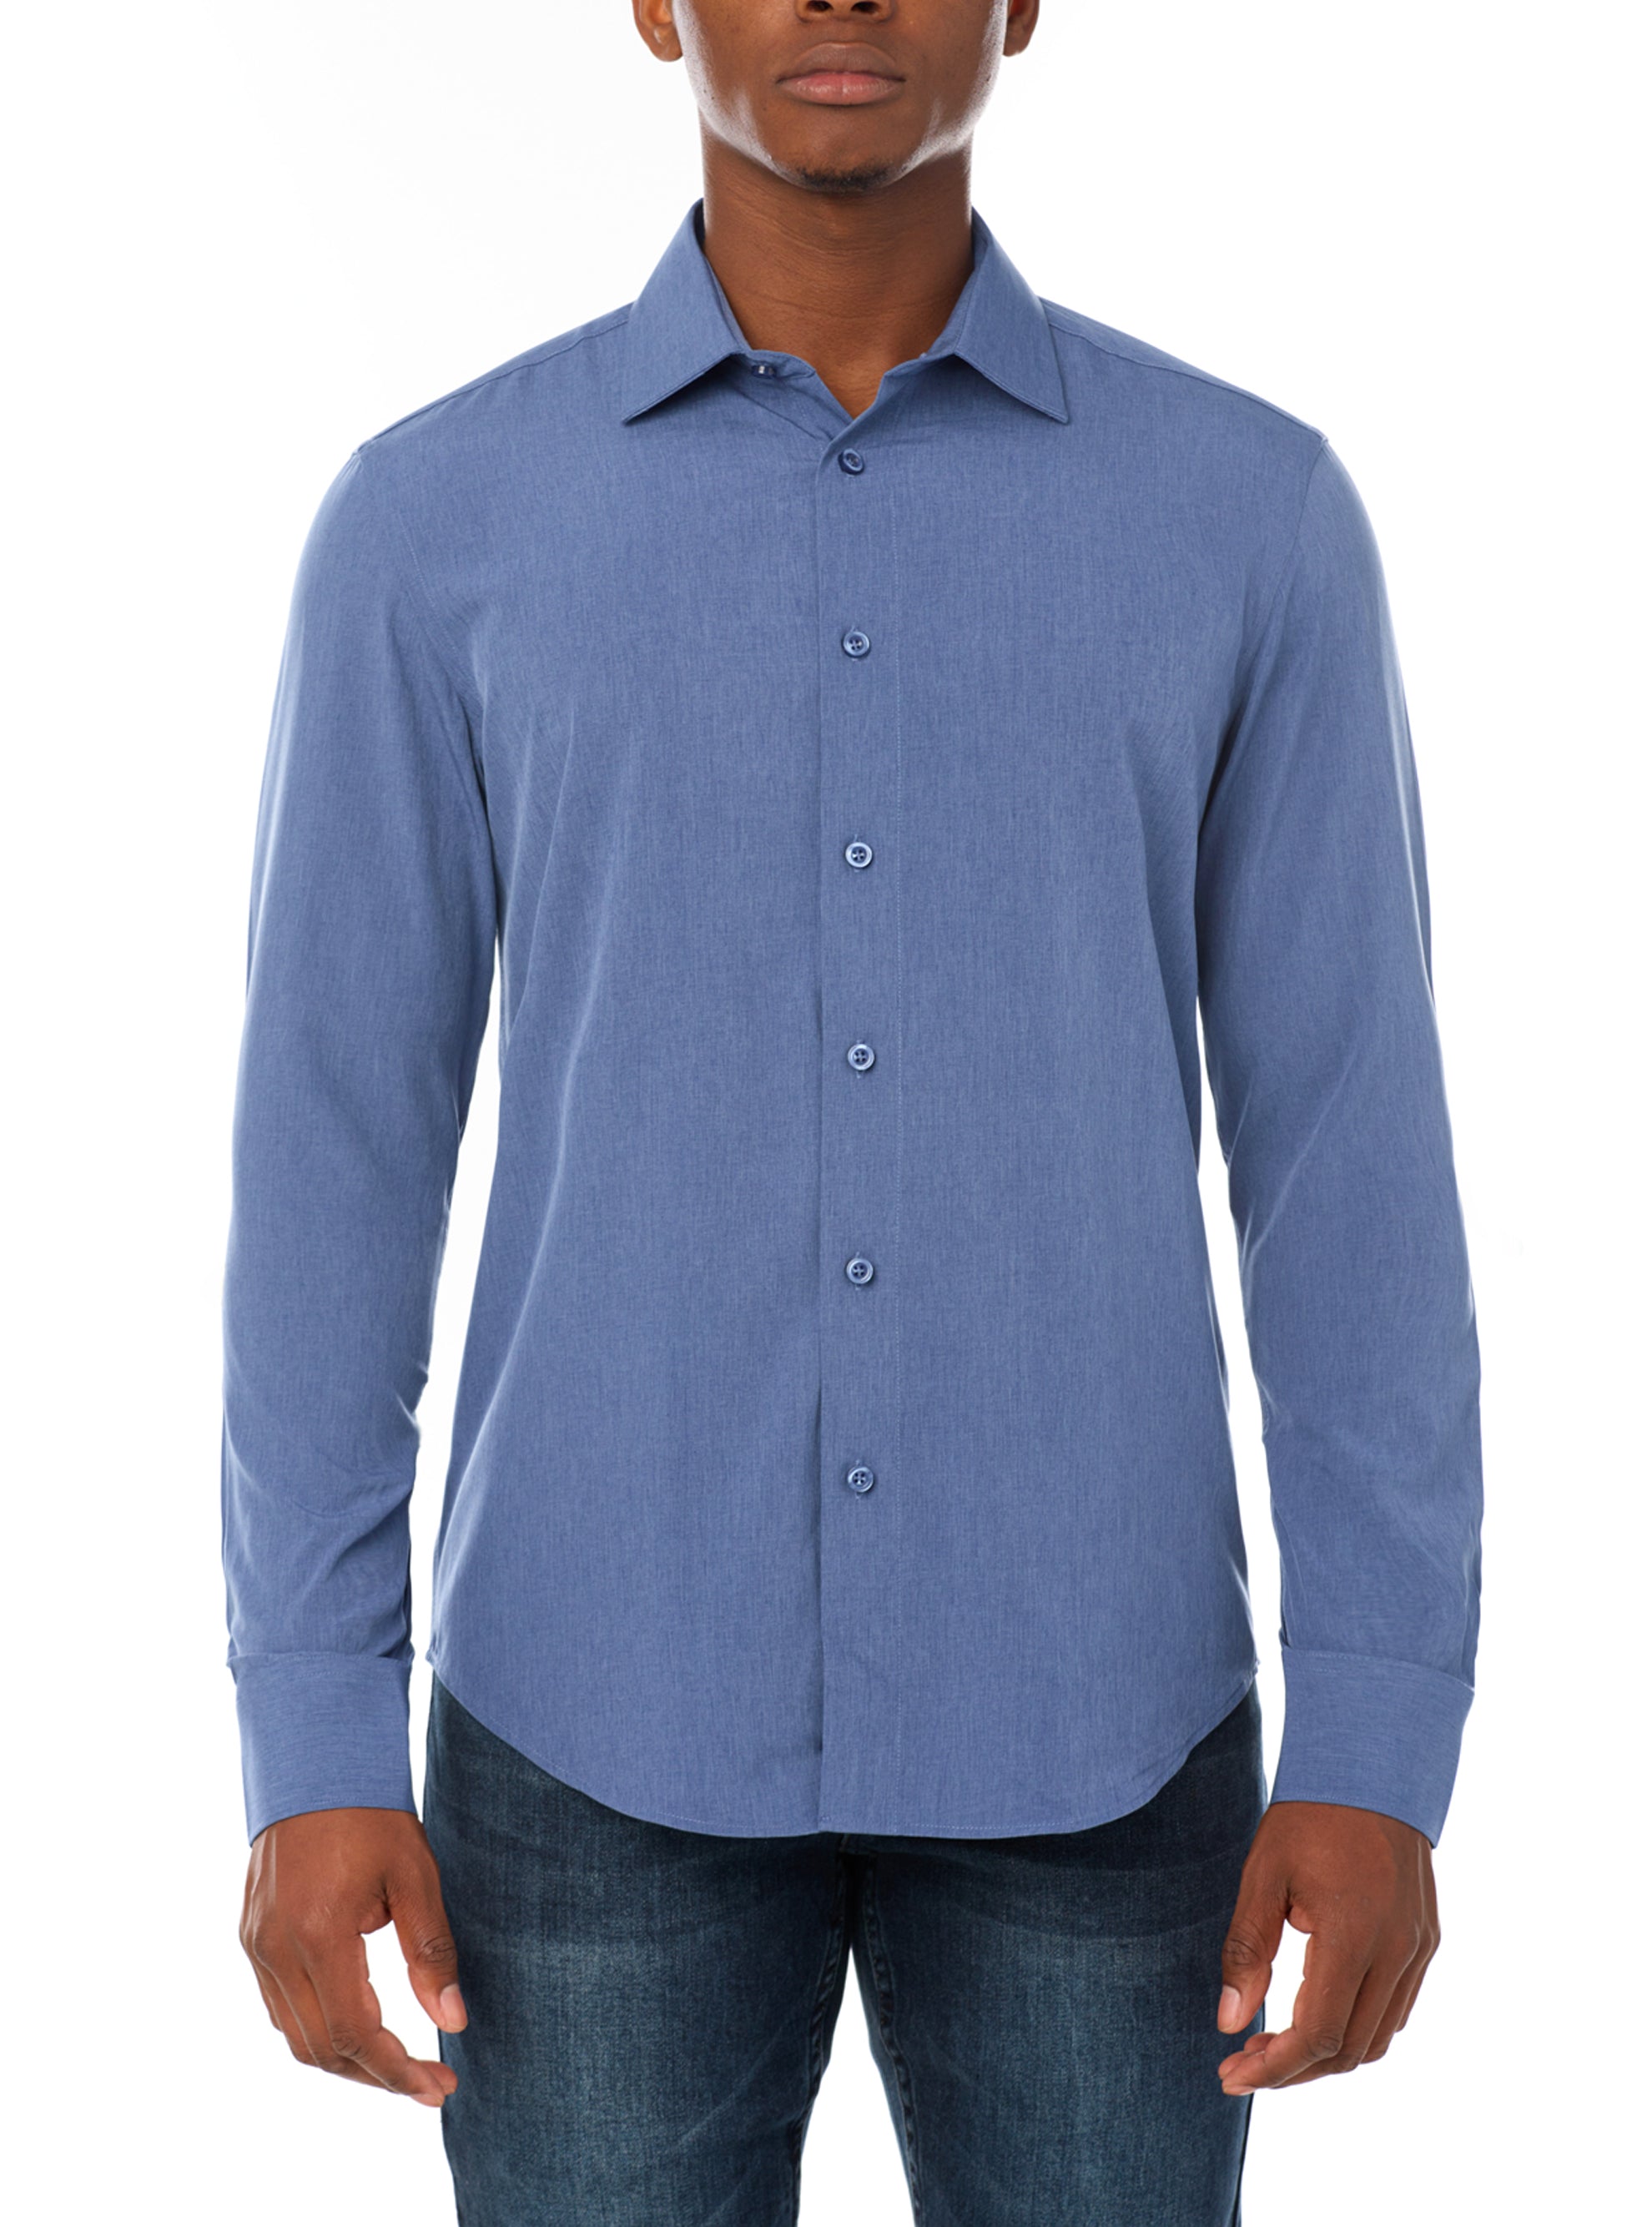 Chemise extensible french blue unie